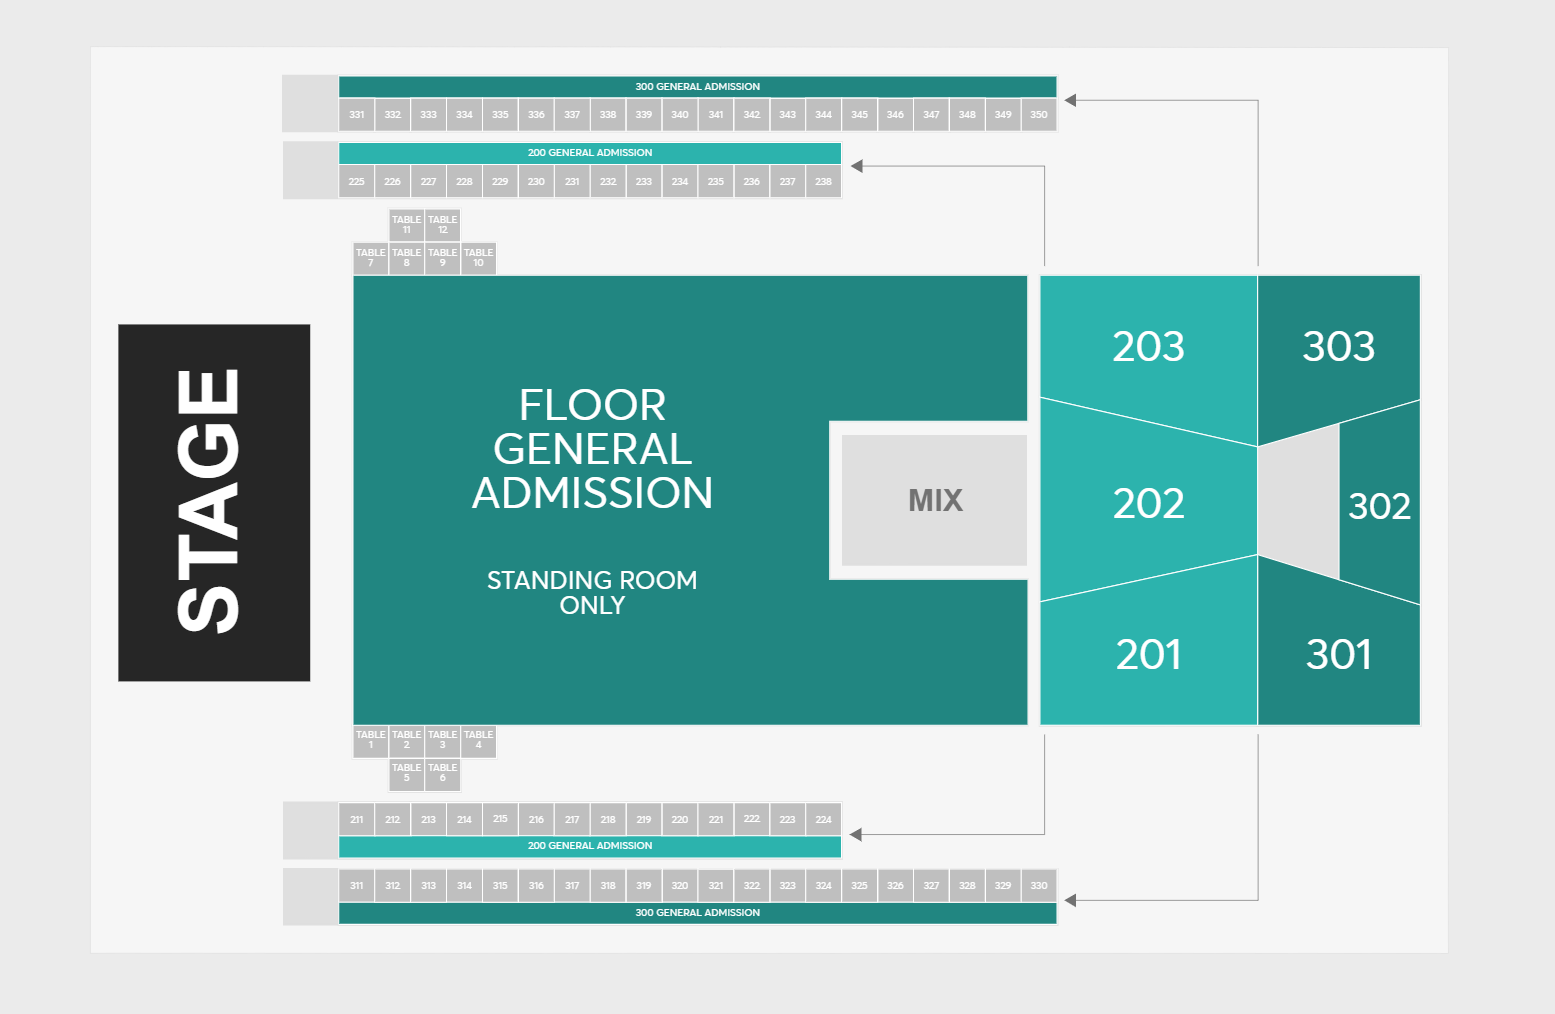 General Admission seats are $97, while seats in the 200s and 300s are $108